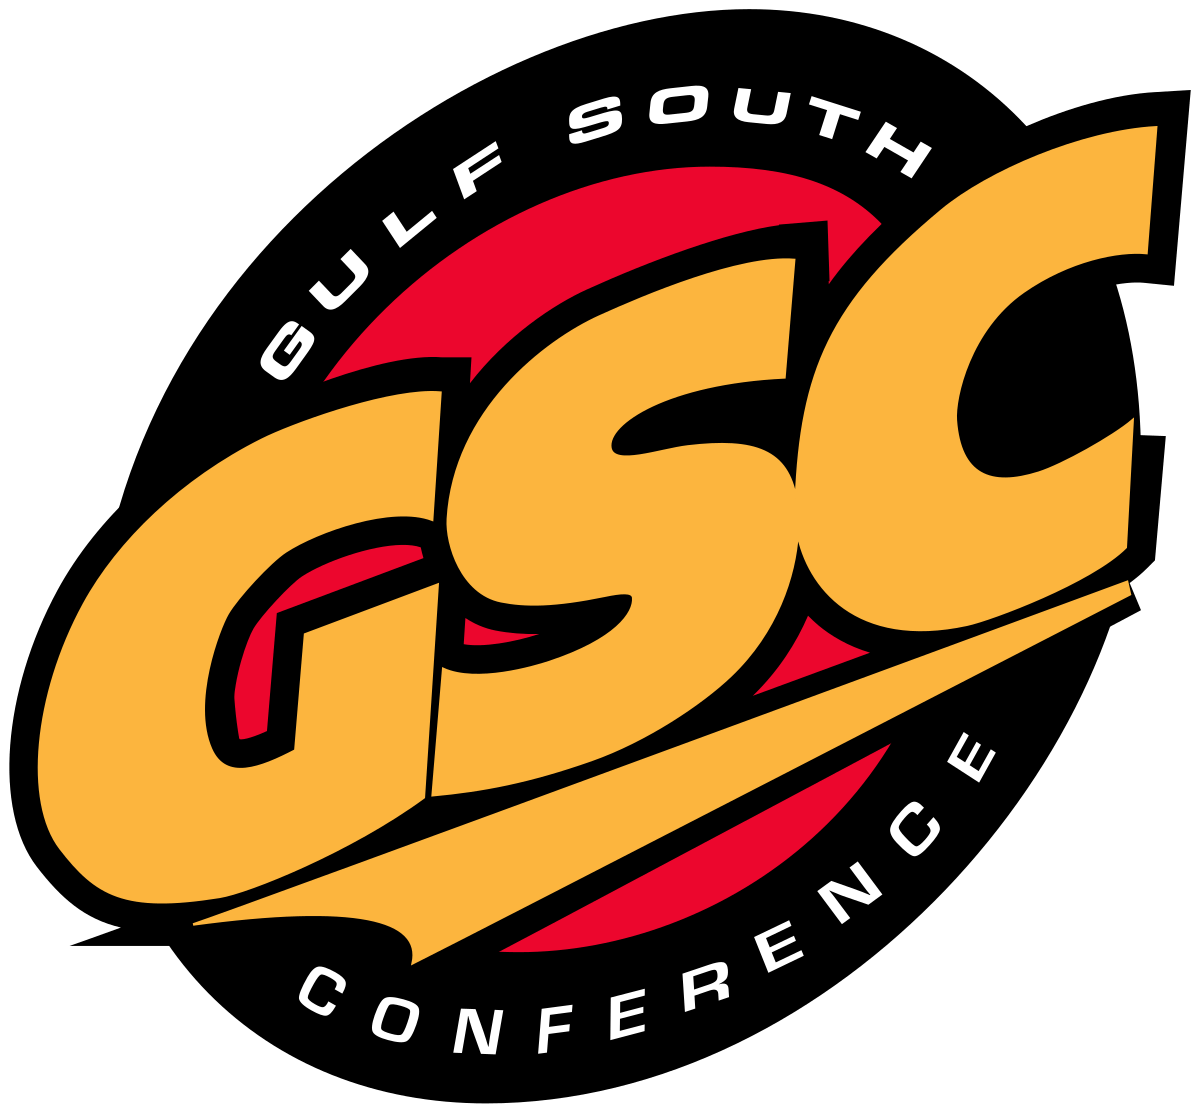 South Logo - Gulf South Conference